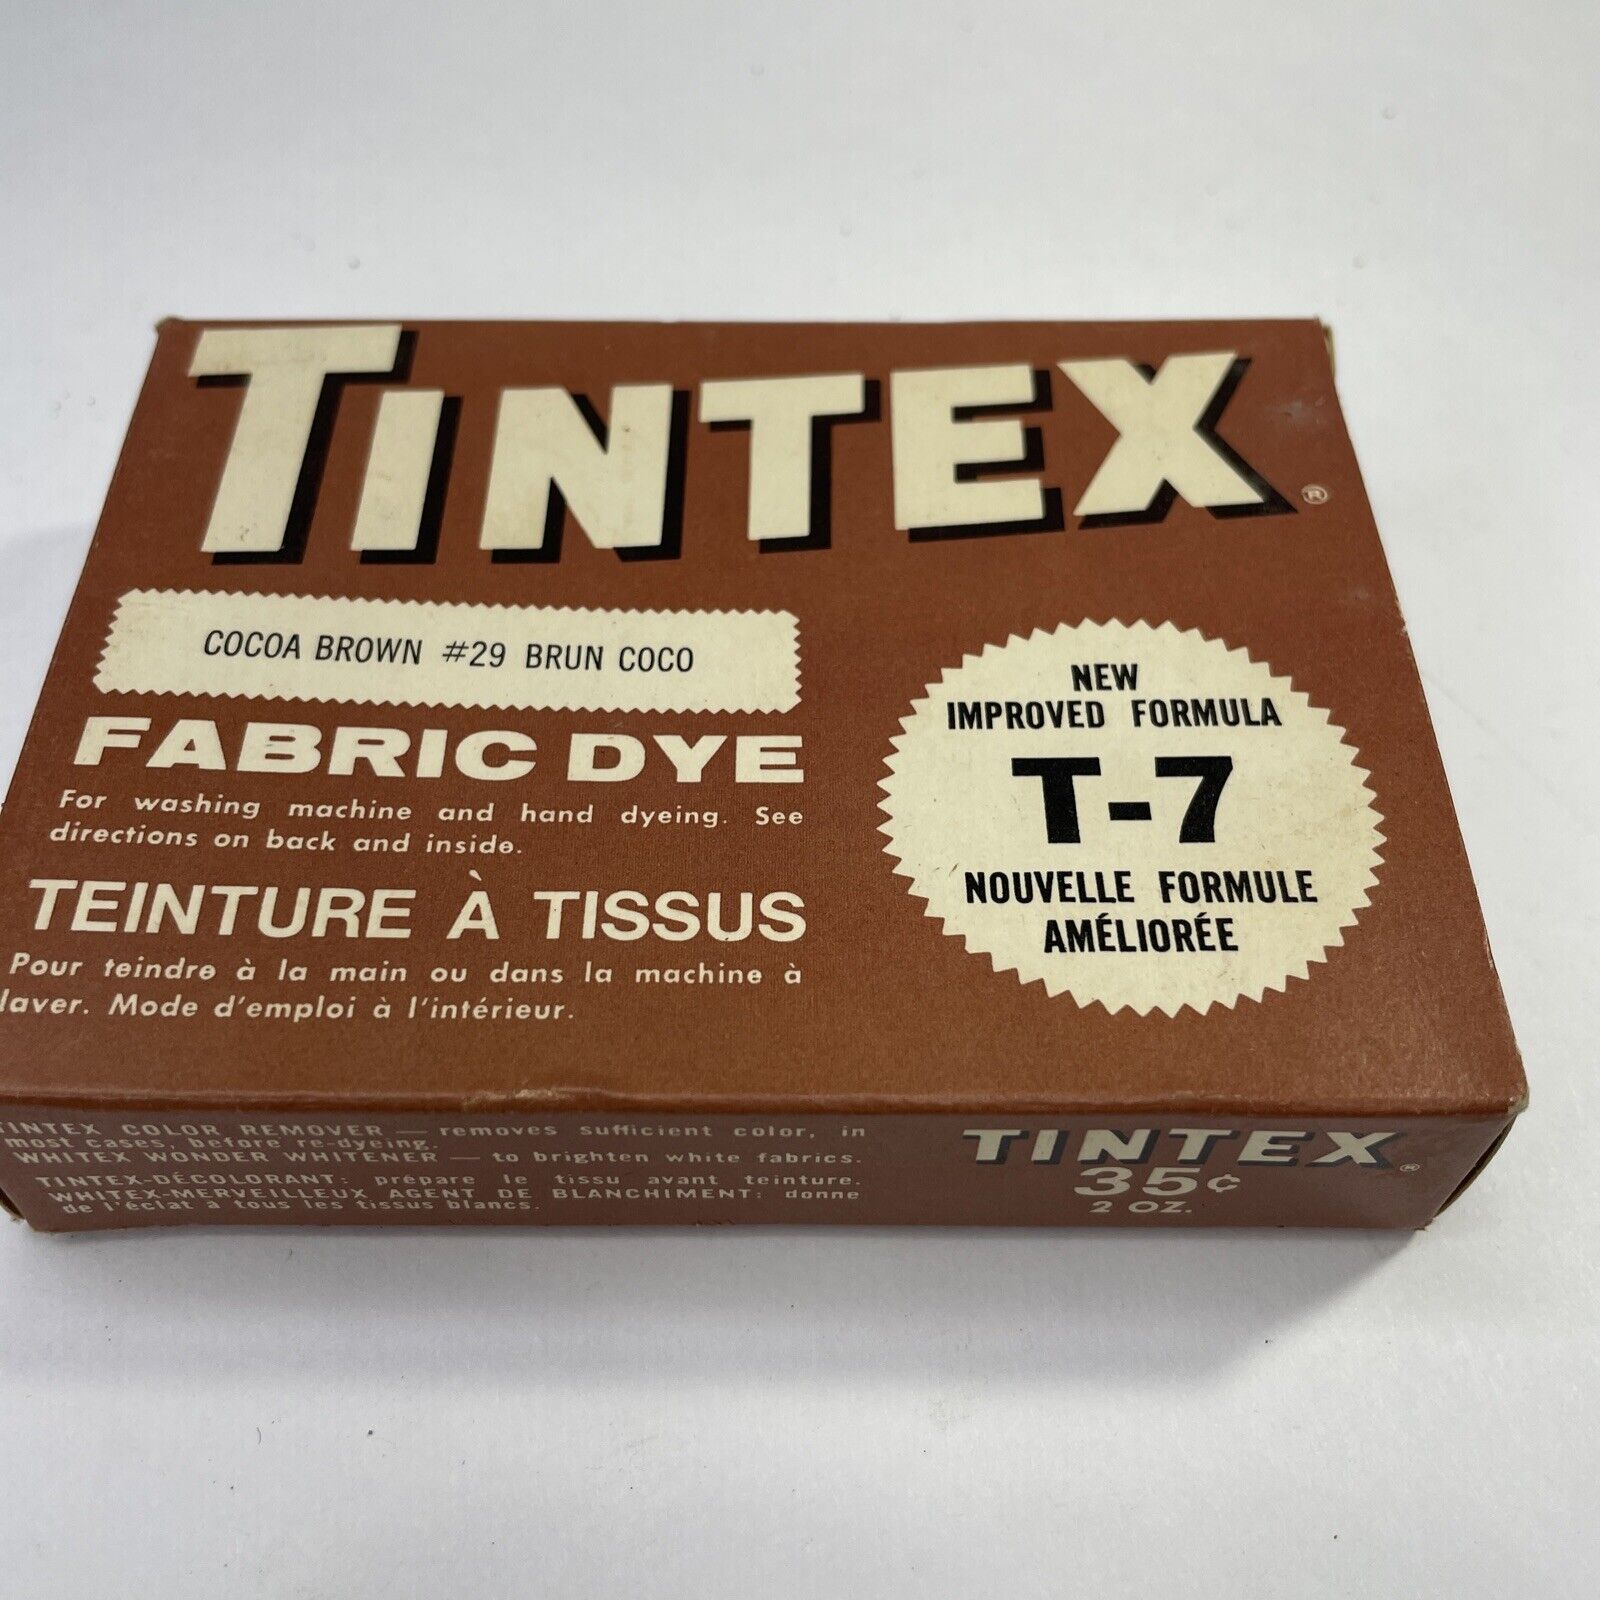 Vintage 1960s NOS Tintex Cocoa Brown Curtain Dye Excellent Unopened Condition